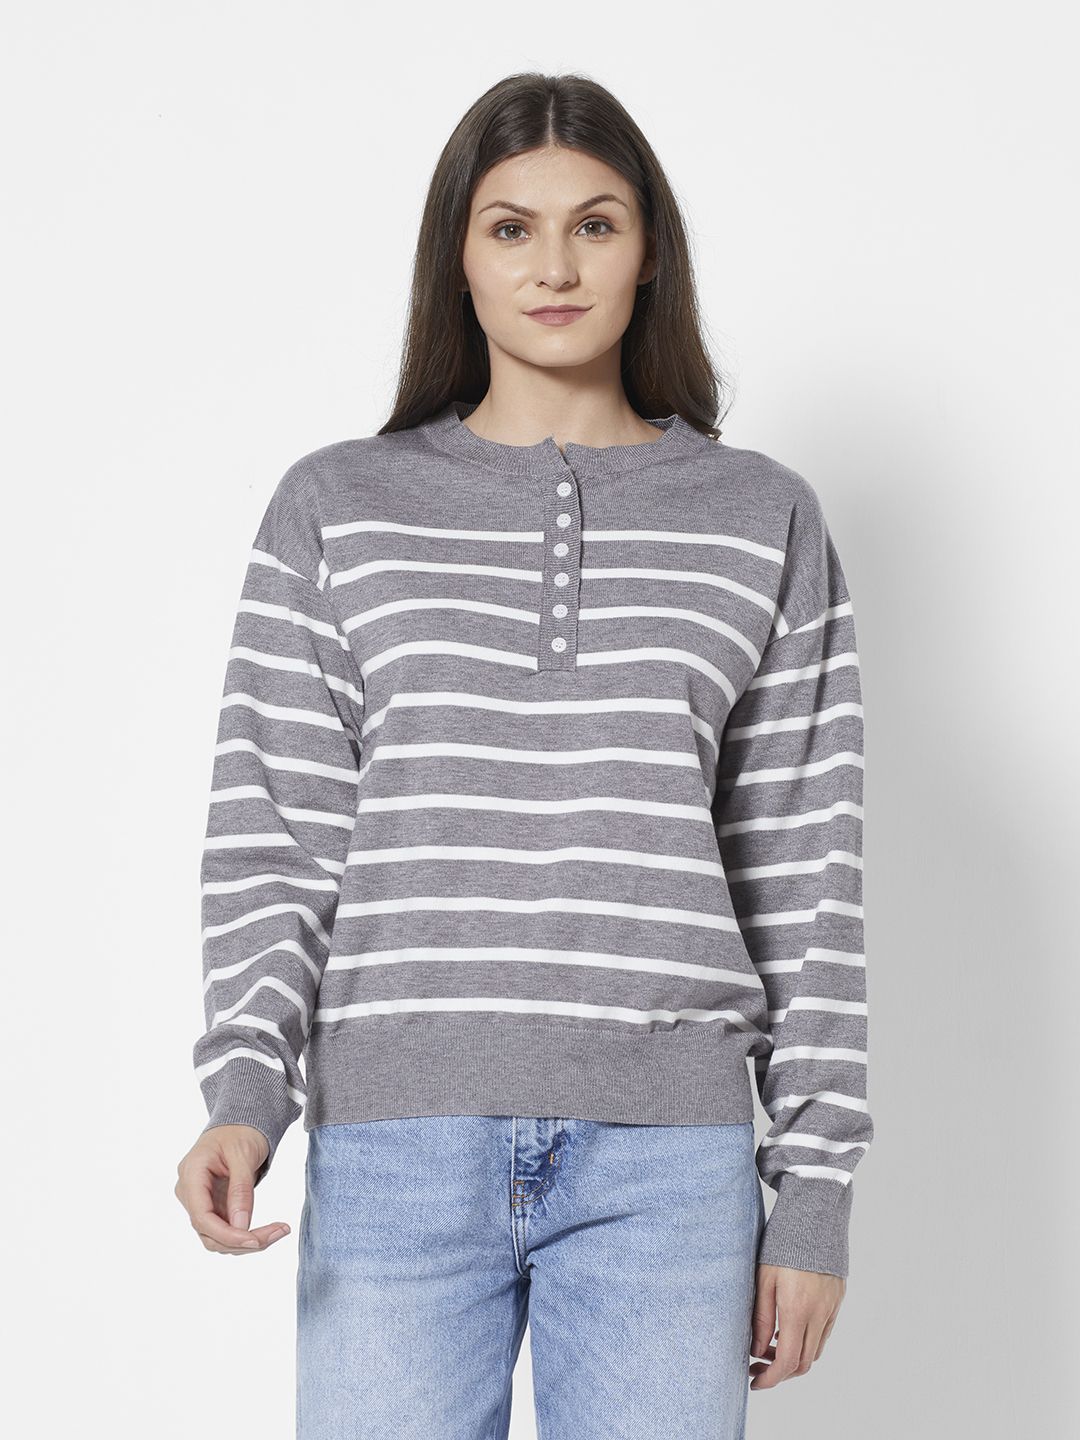 URBANIC Women Grey Striped Relaxed Fit Sweatshirt Price in India